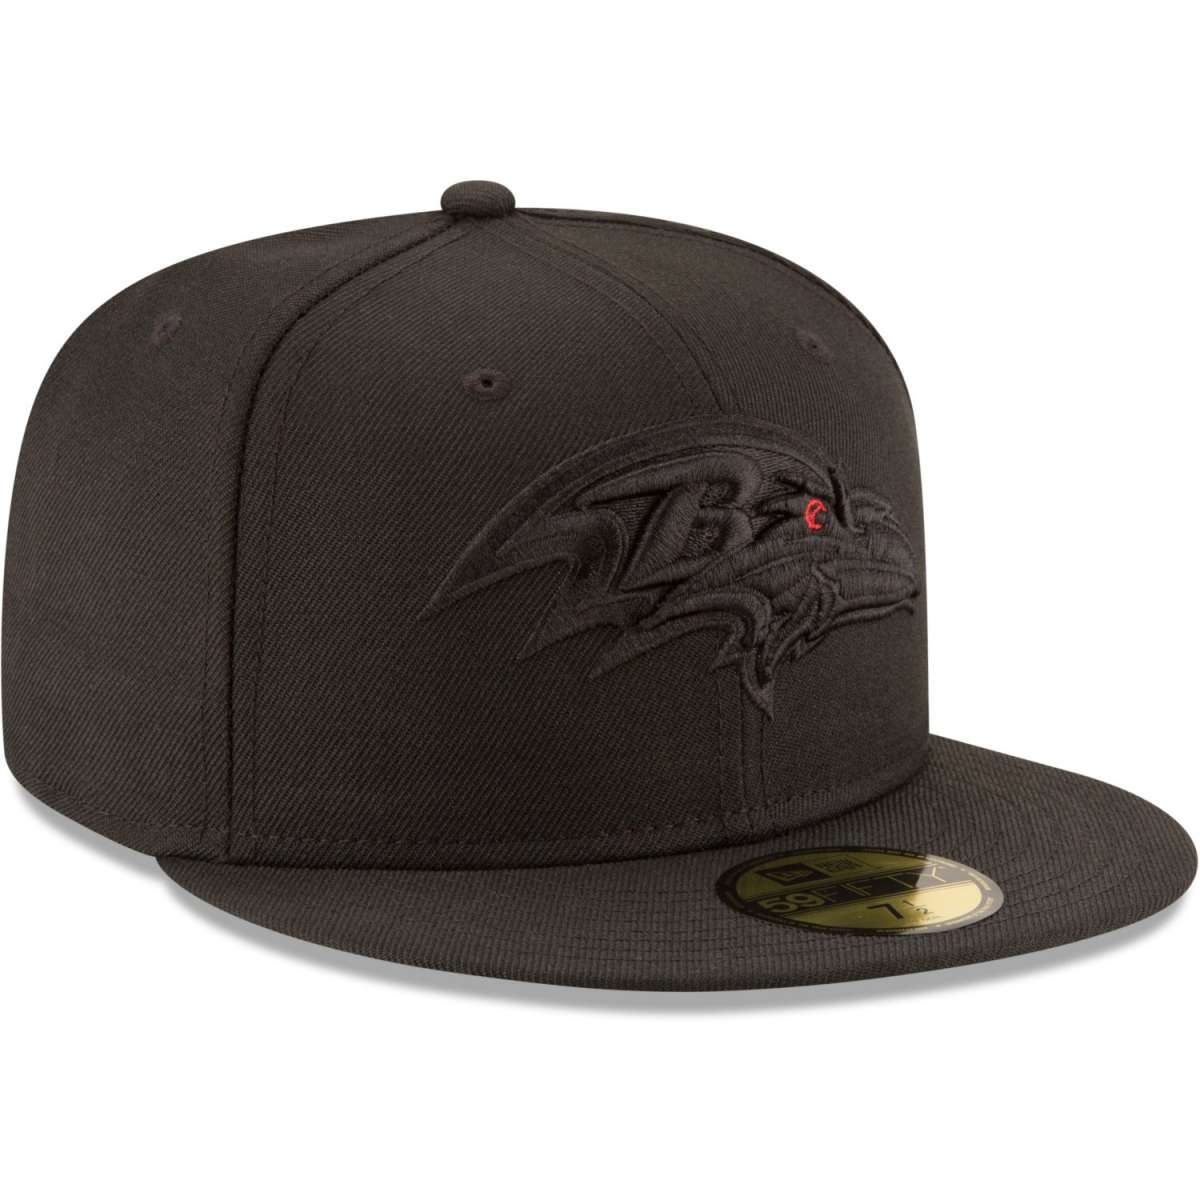 New Era 59Fifty Cap - NFL BLACK Baltimore Ravens | Fitted | Caps ...